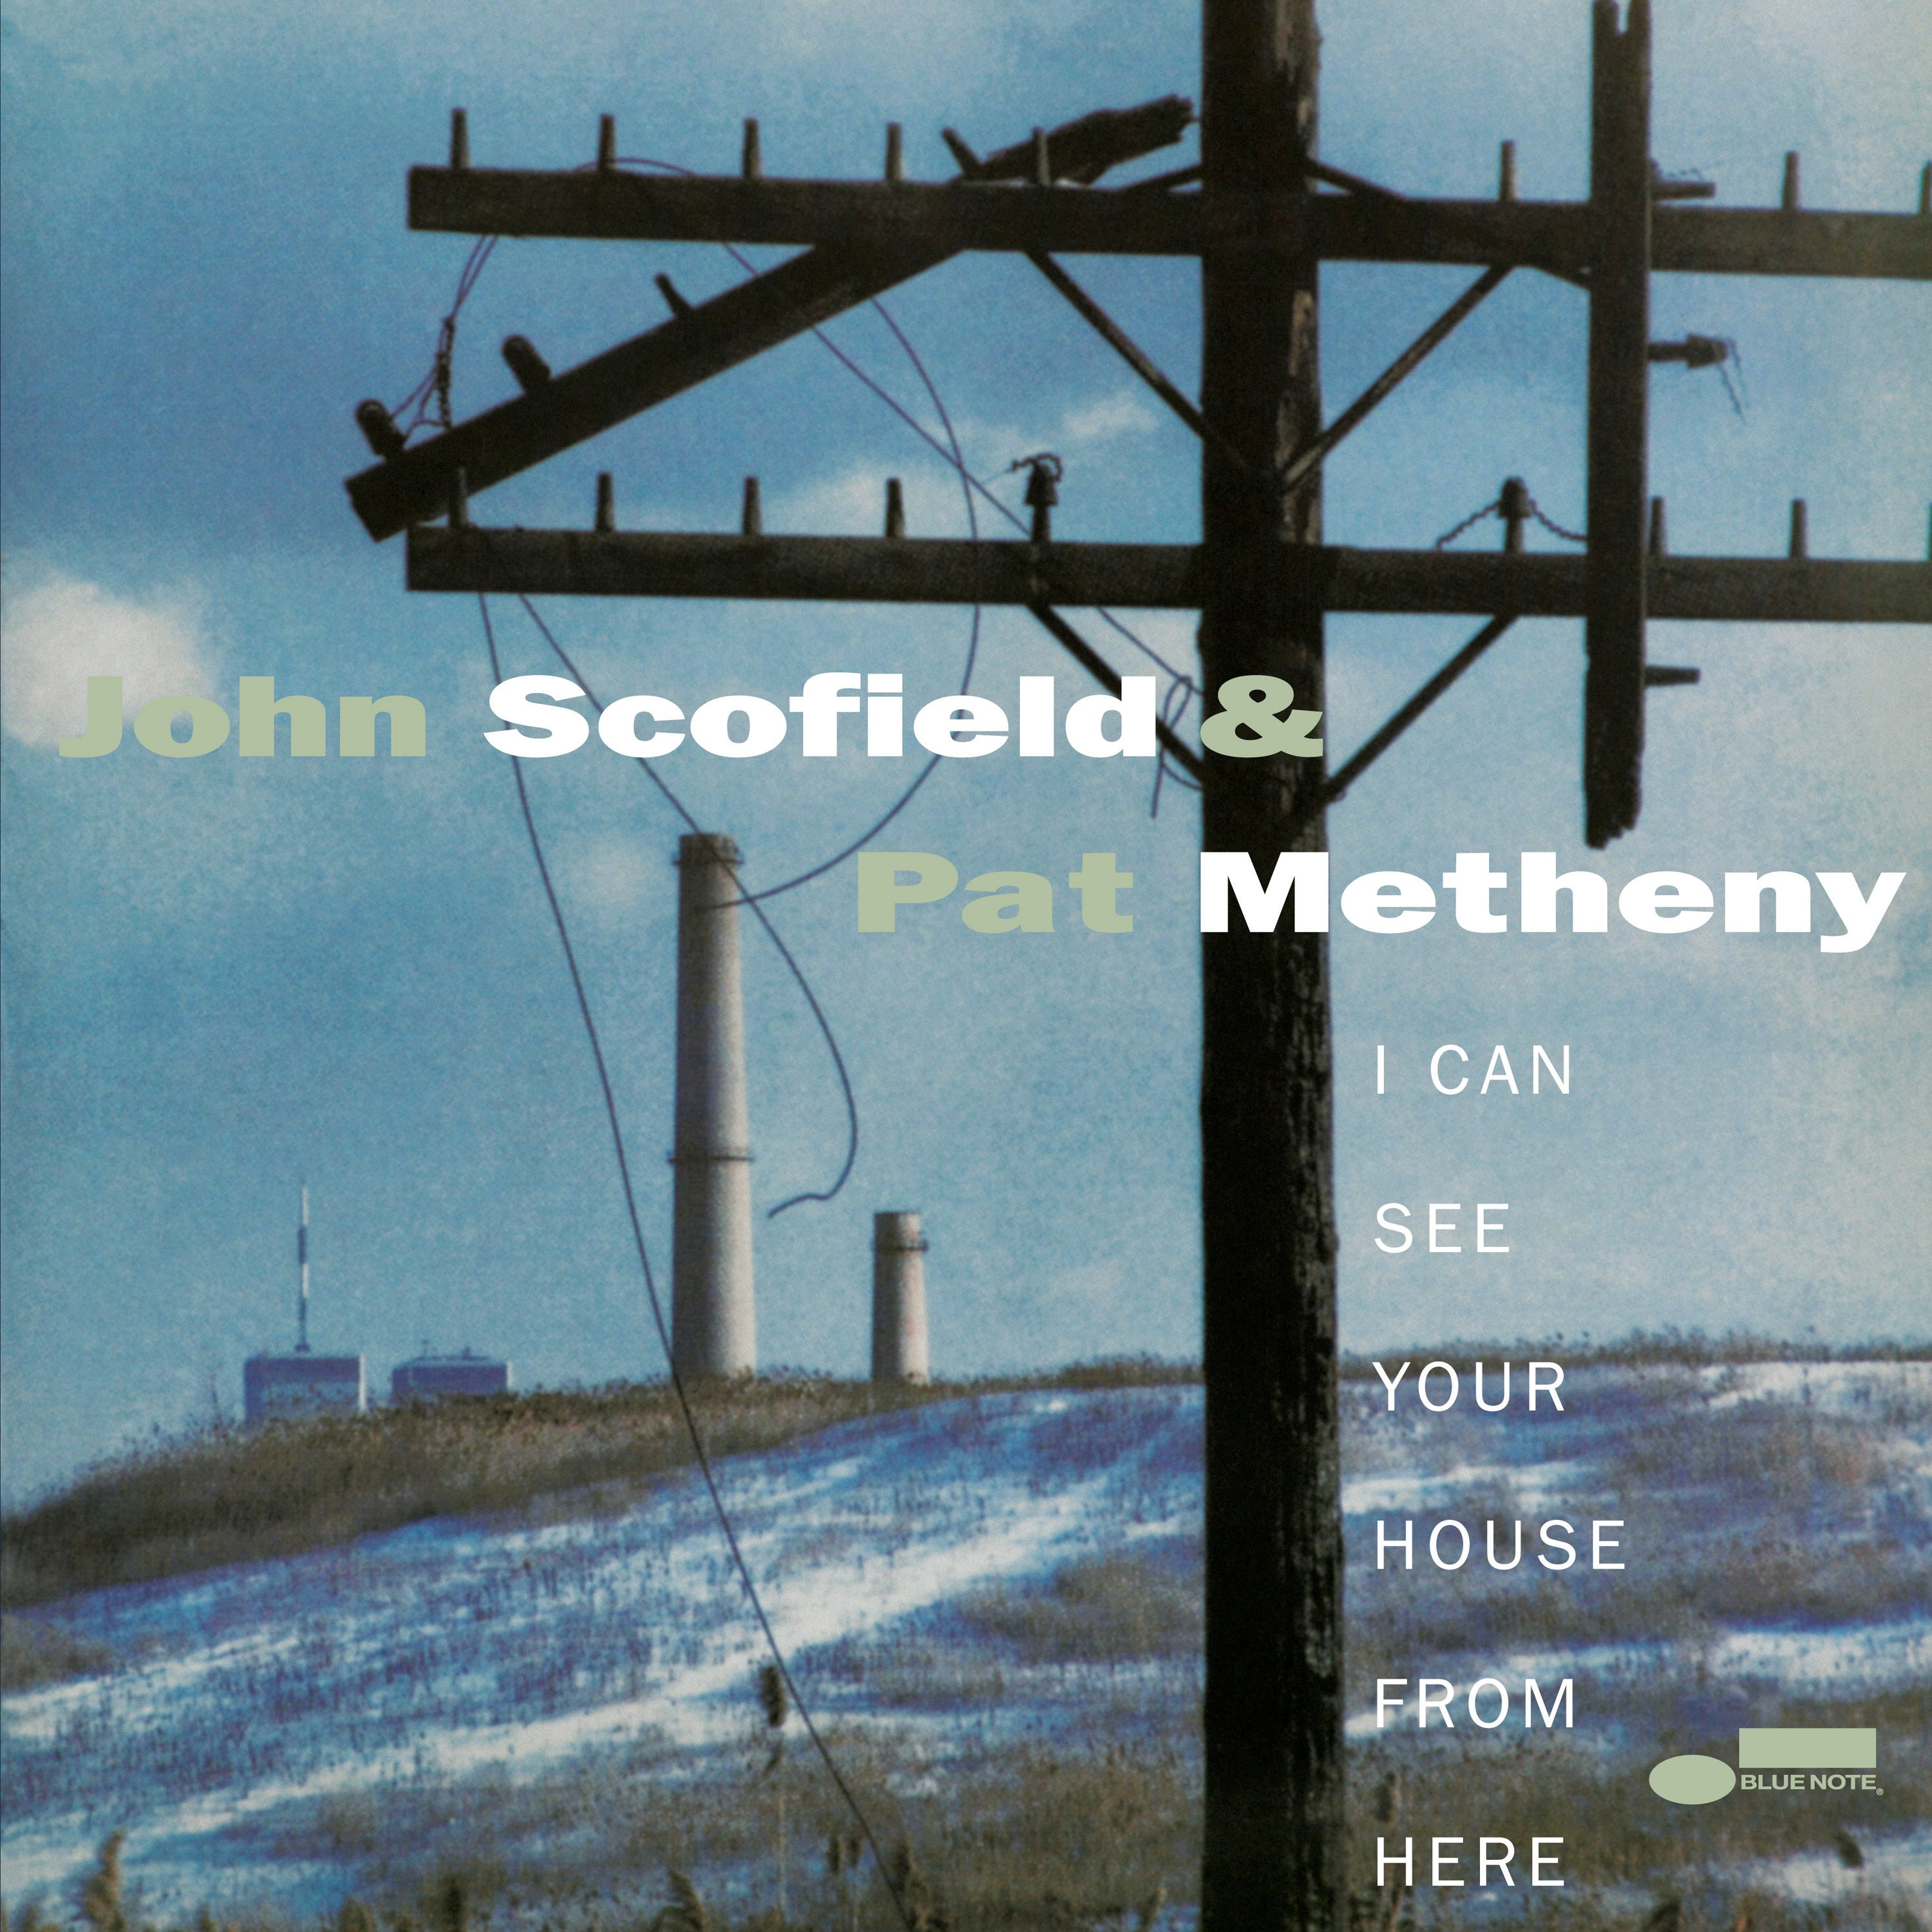 John Scofield & Pat Metheny - I Can See Your House From Here (Blue Note Tone Poet Series)